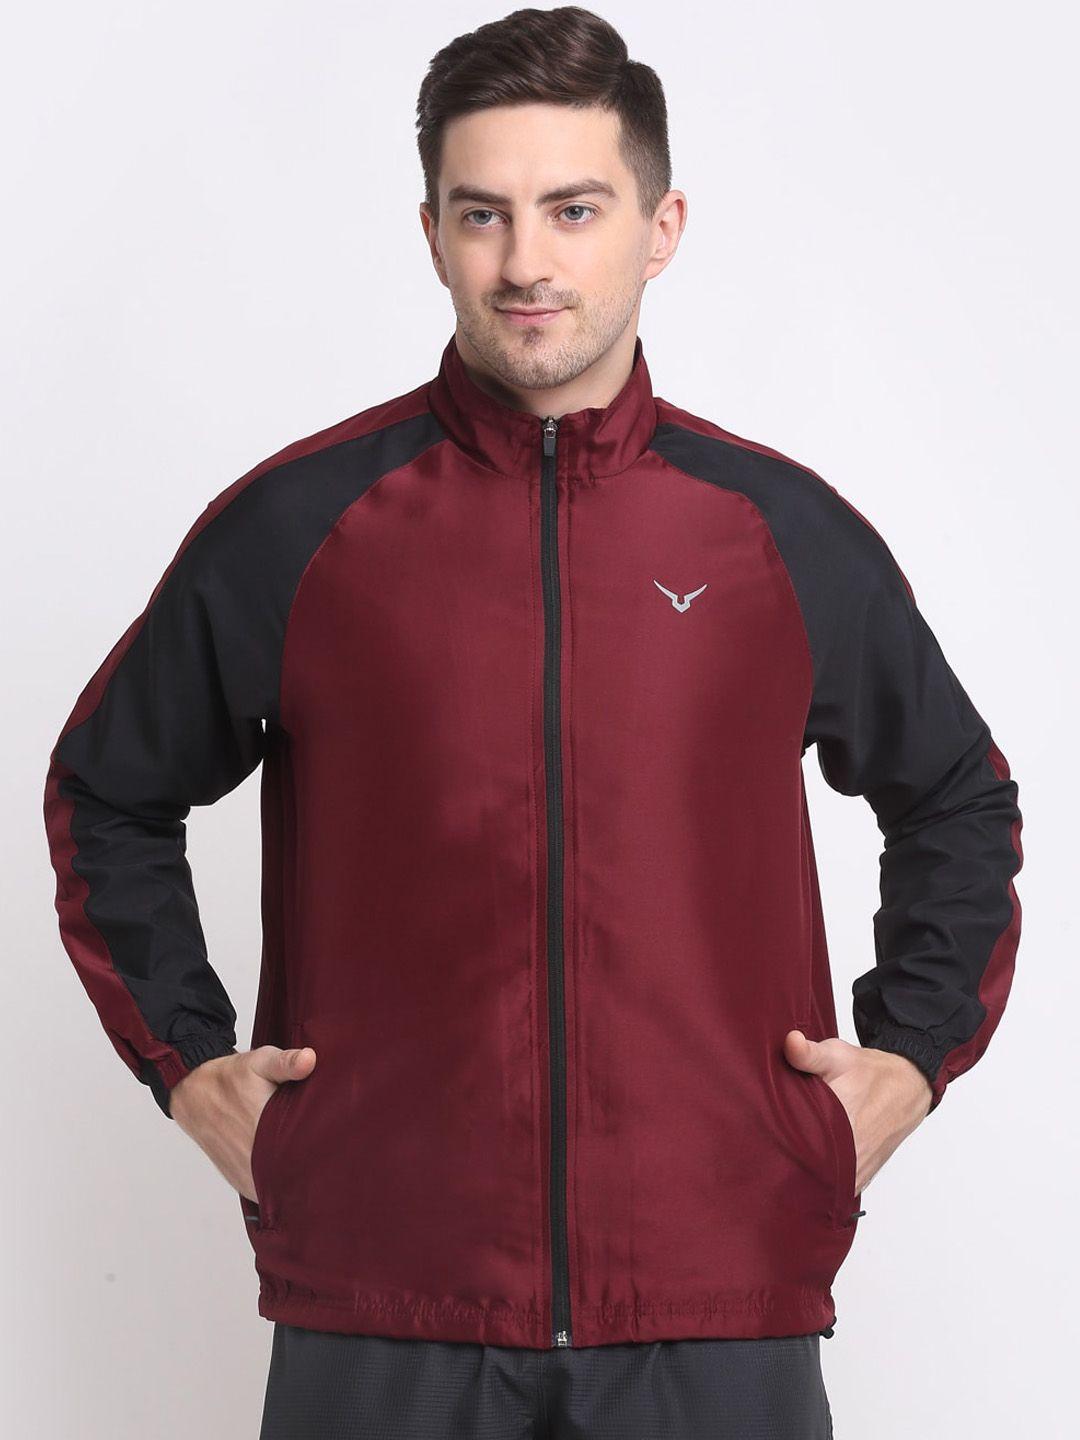 invincible men maroon lightweight training or gym sporty jacket